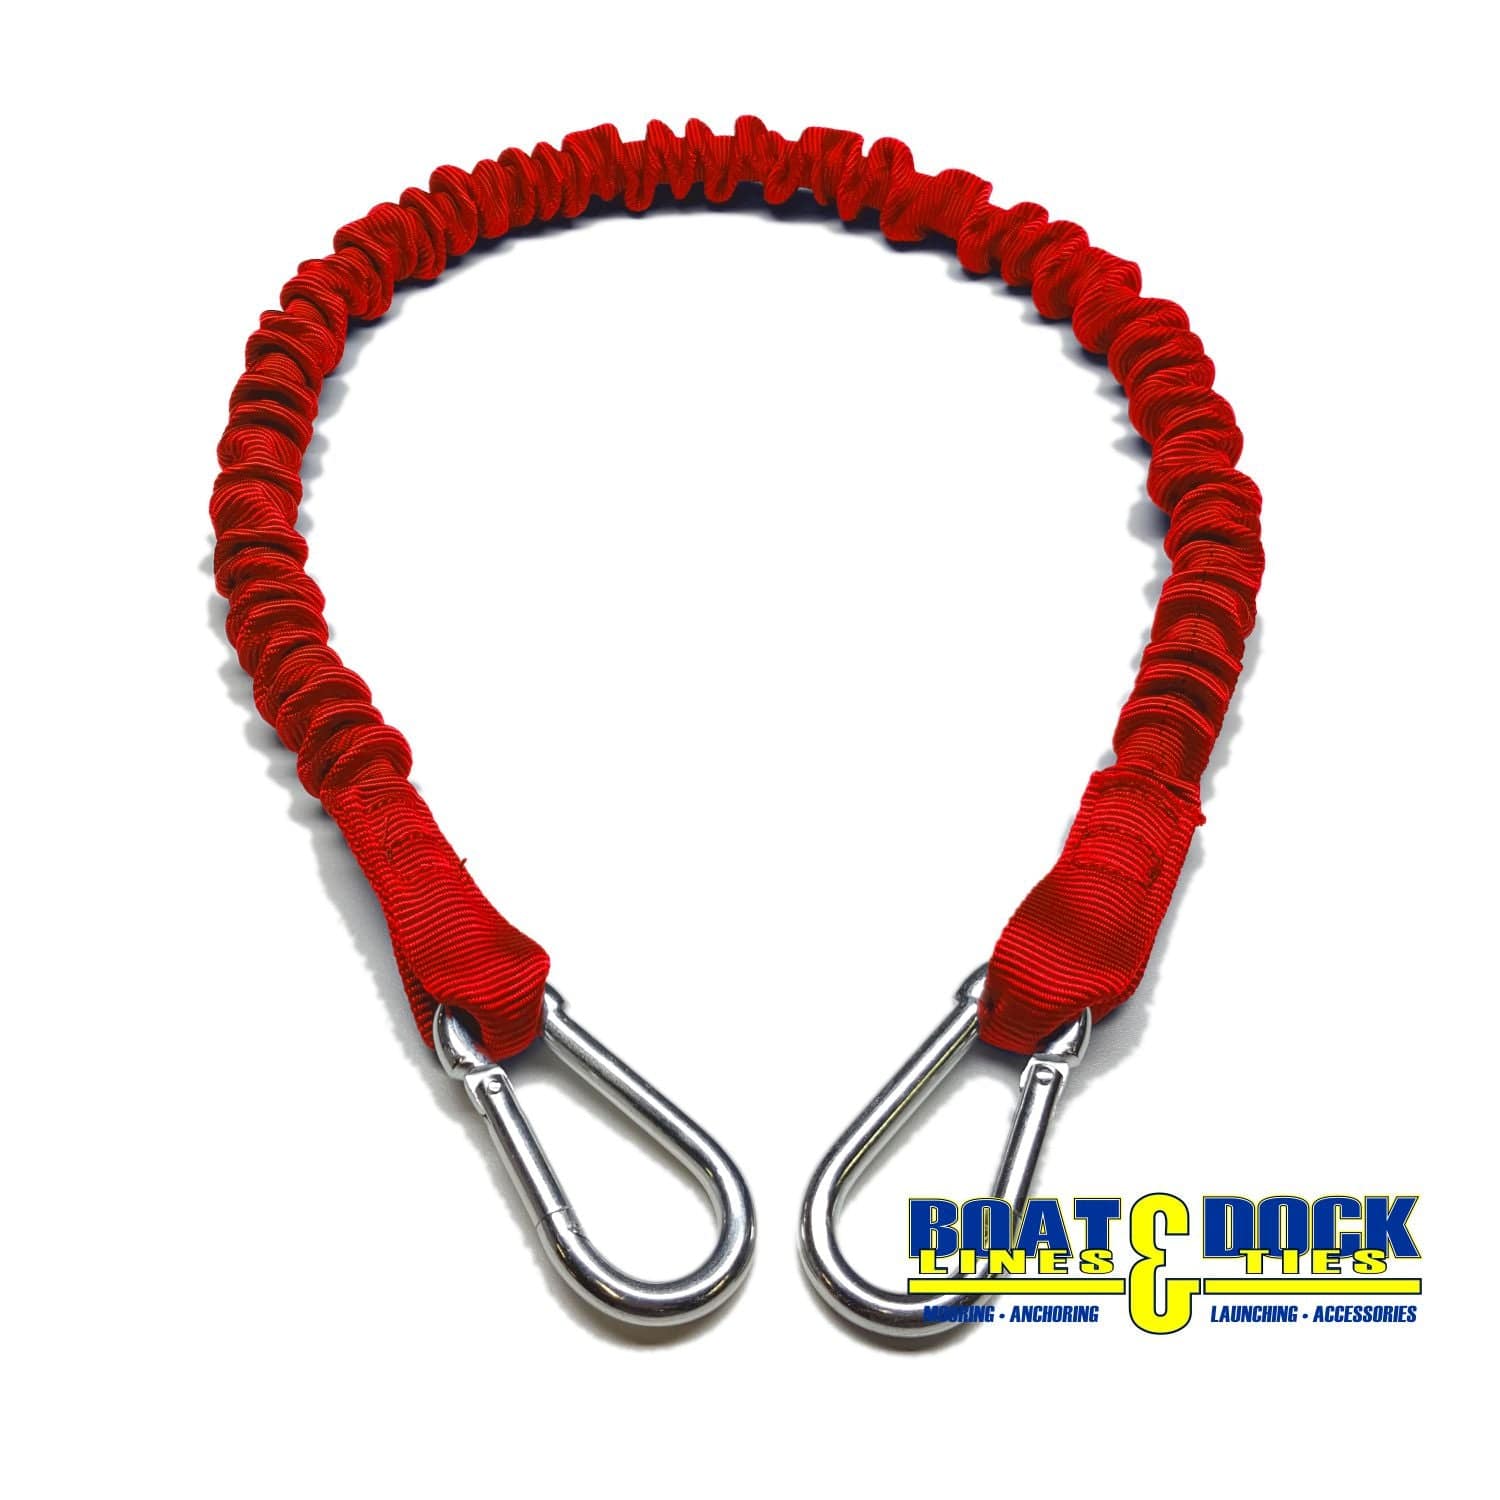 Boat Dock Tie Bungee Cords, 2 Hooked Ends, UV Protected Bungee Cords - Set of 2 - Made in USA - Boat Lines & Dock Ties Boat Lines & Dock Ties 24" / Red